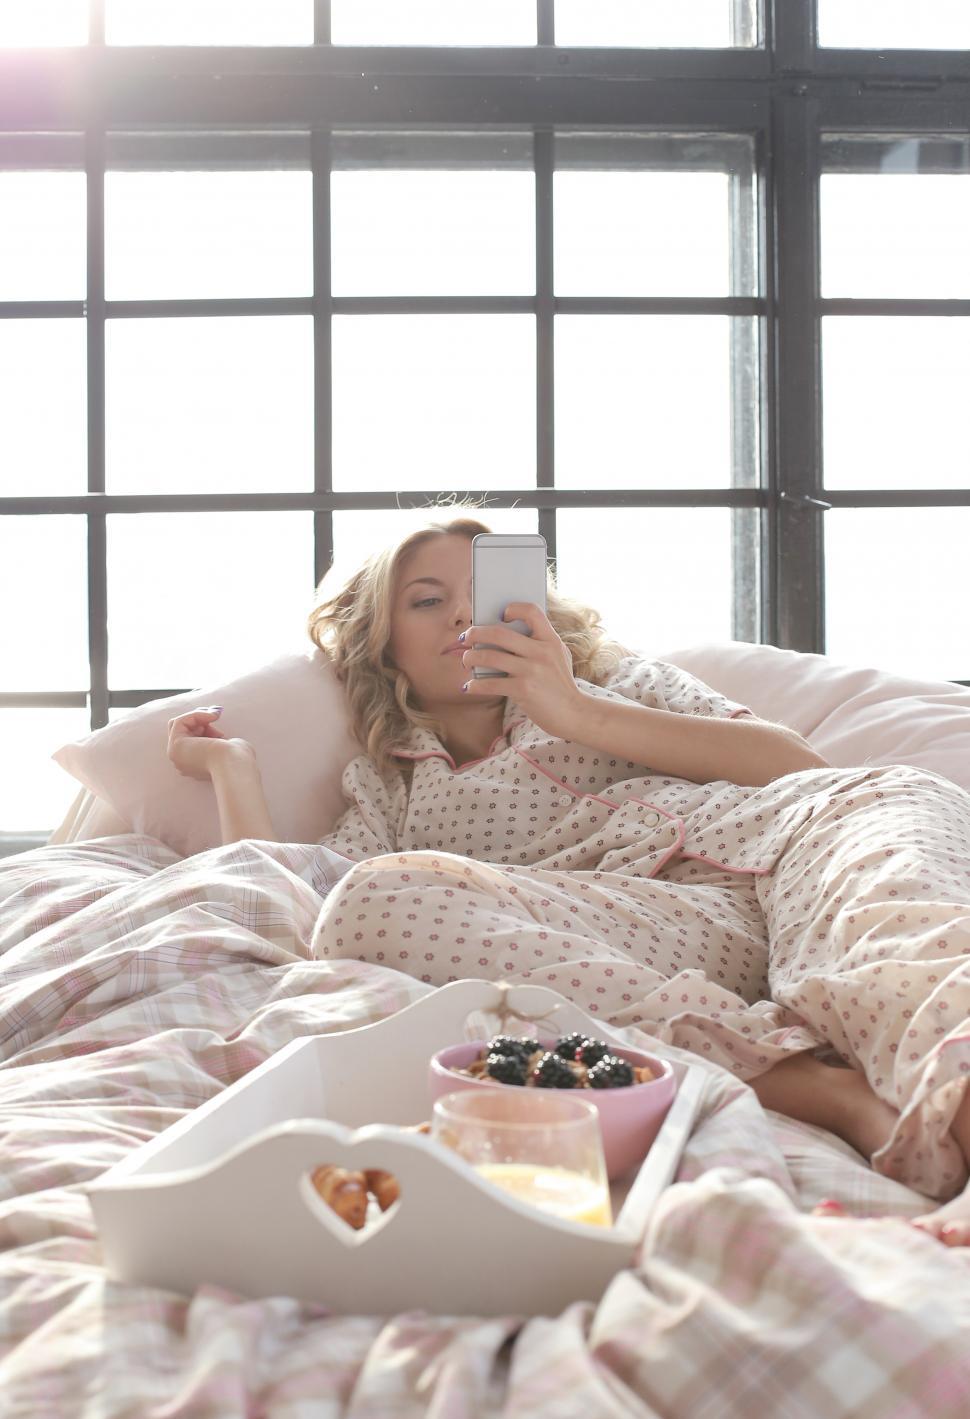 Free Image of Woman in bed with her phone and breakfast 